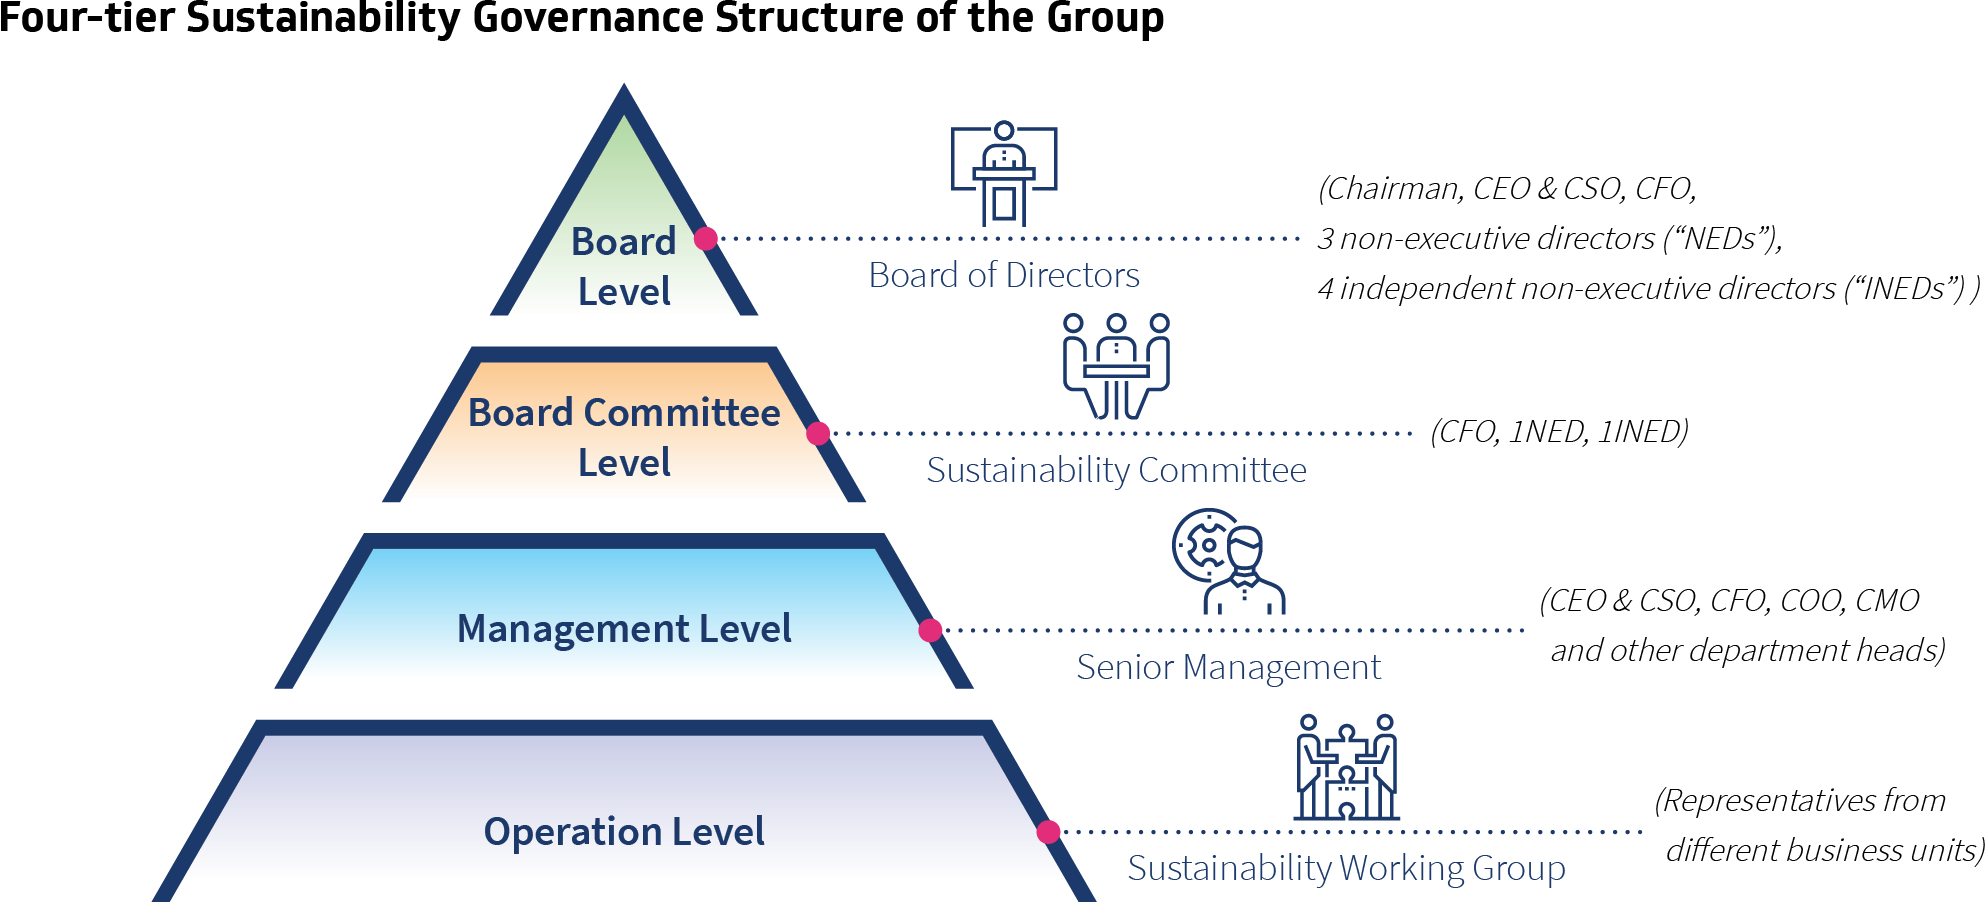 Four-tier Sustainability Governance Structure of the Group